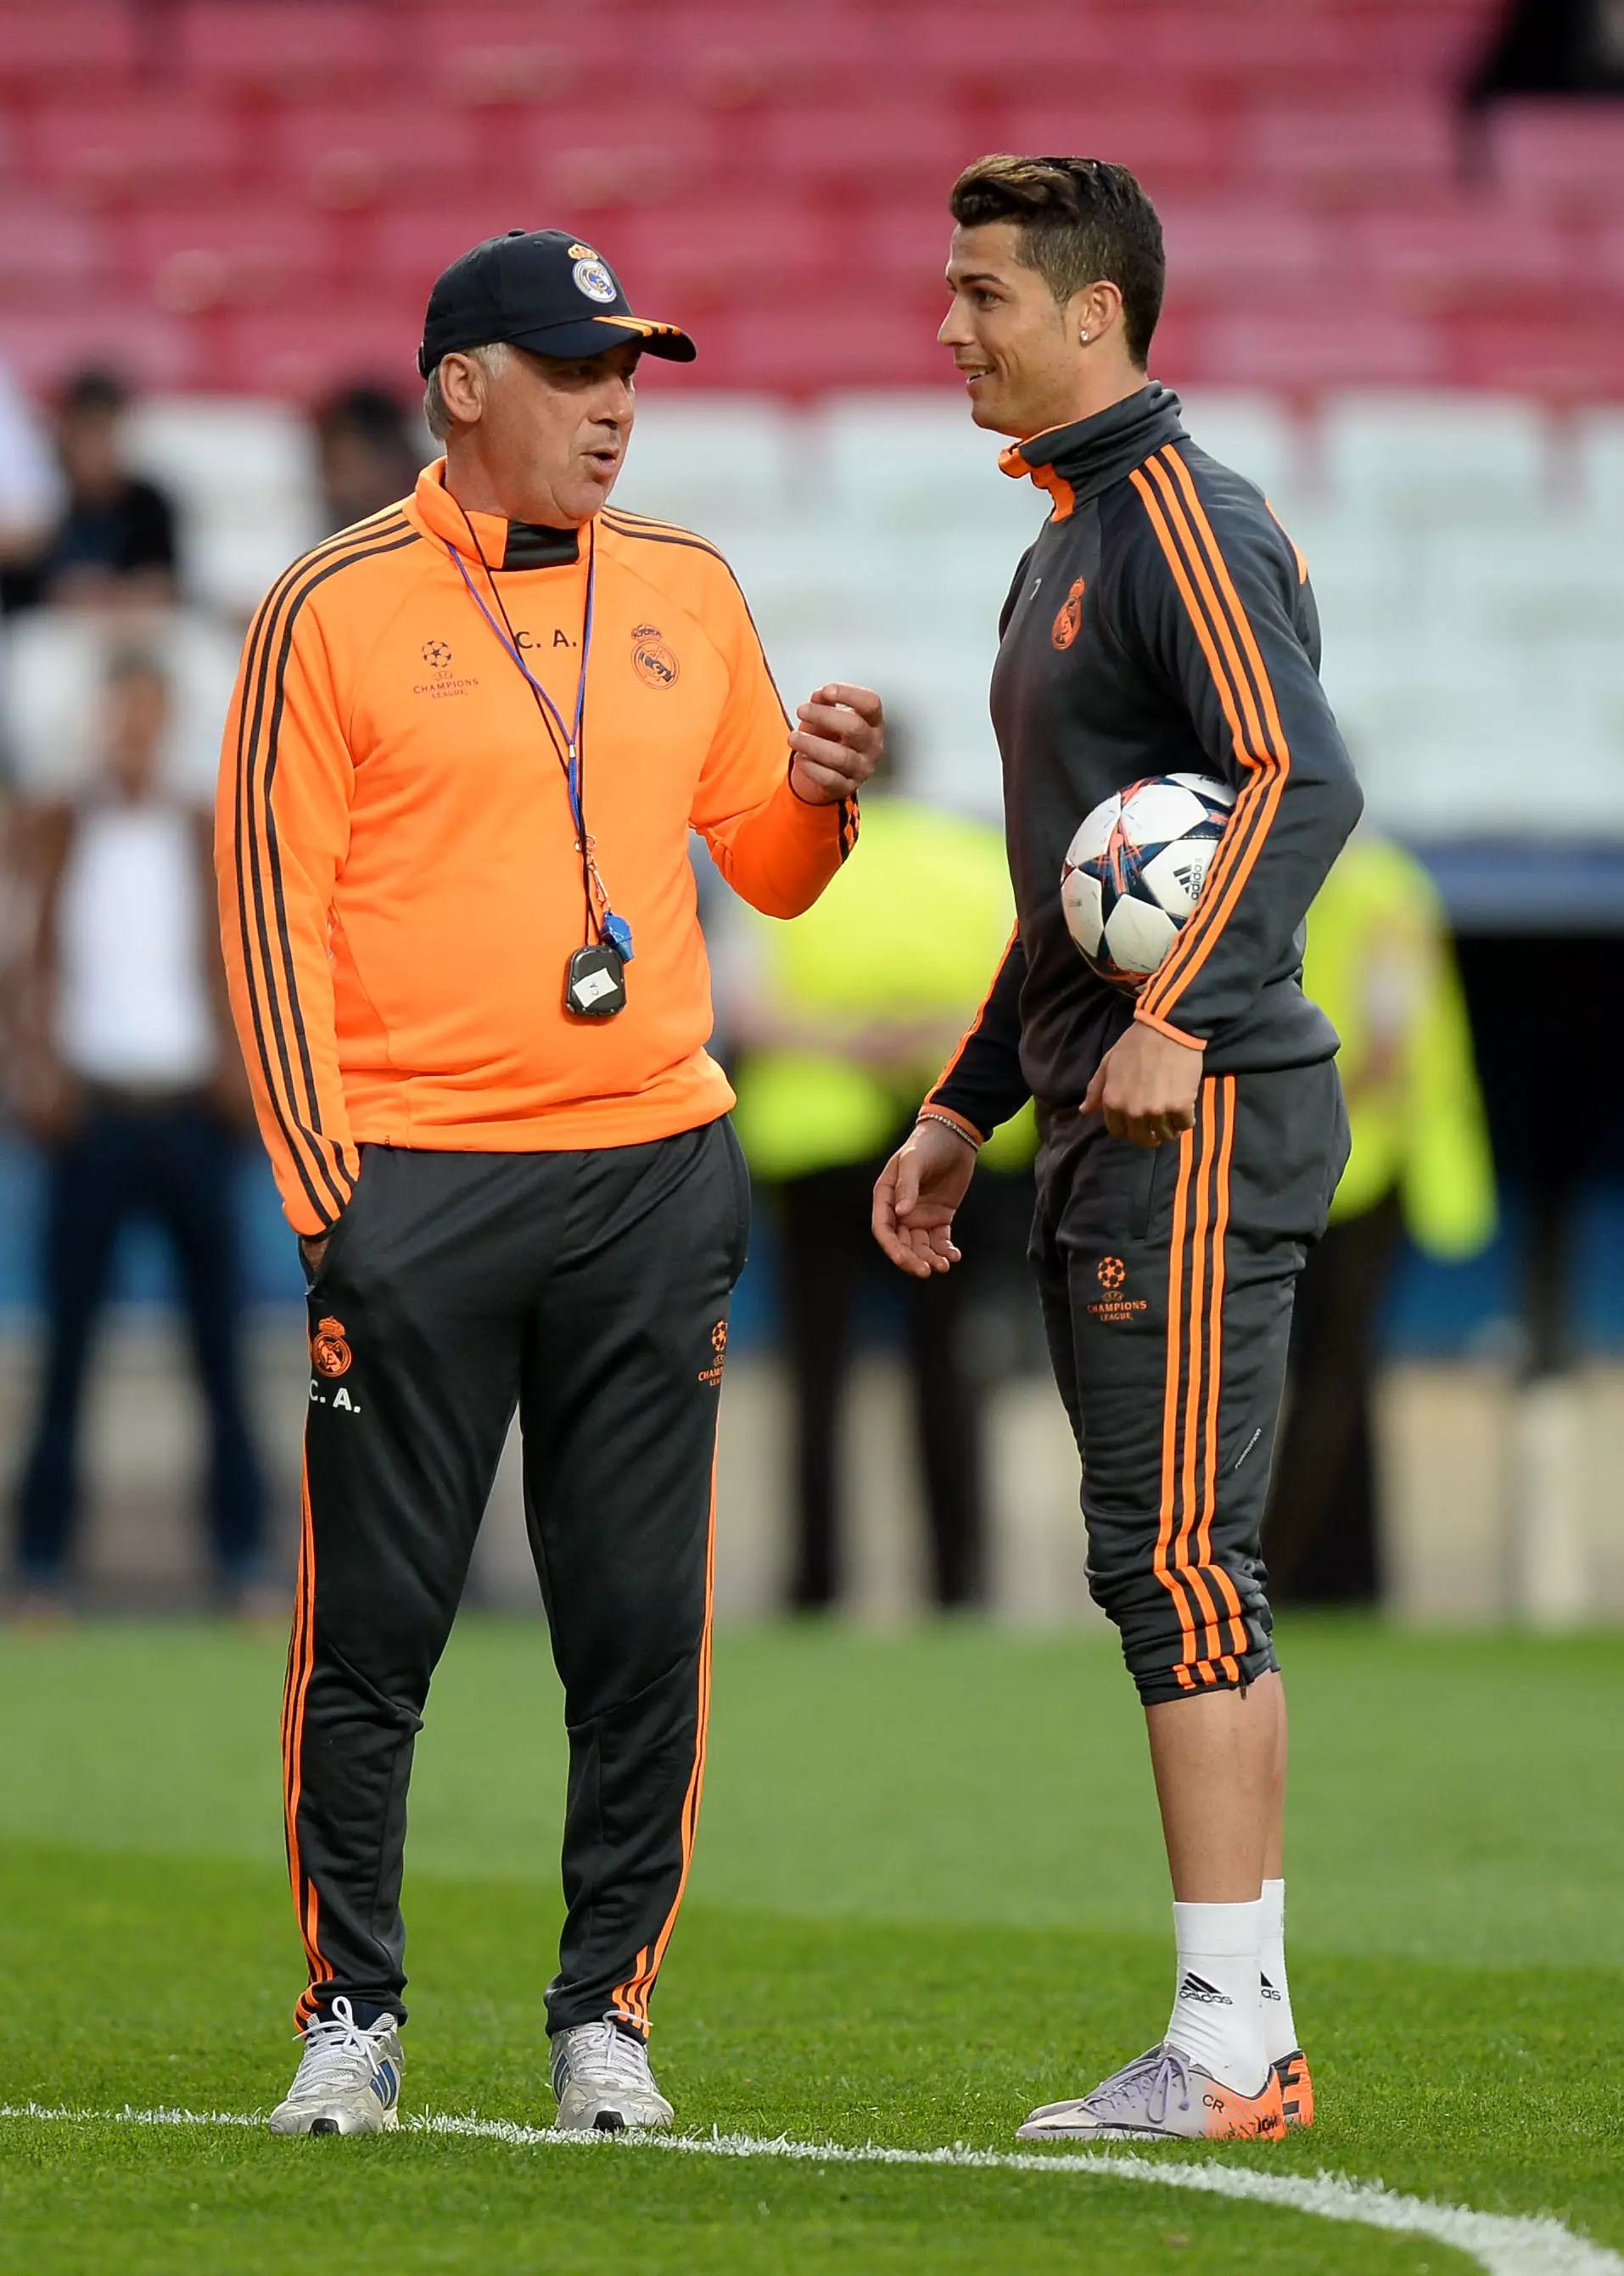 Ronaldo and Ancelotti in Real Madrid training in 2014 (Image